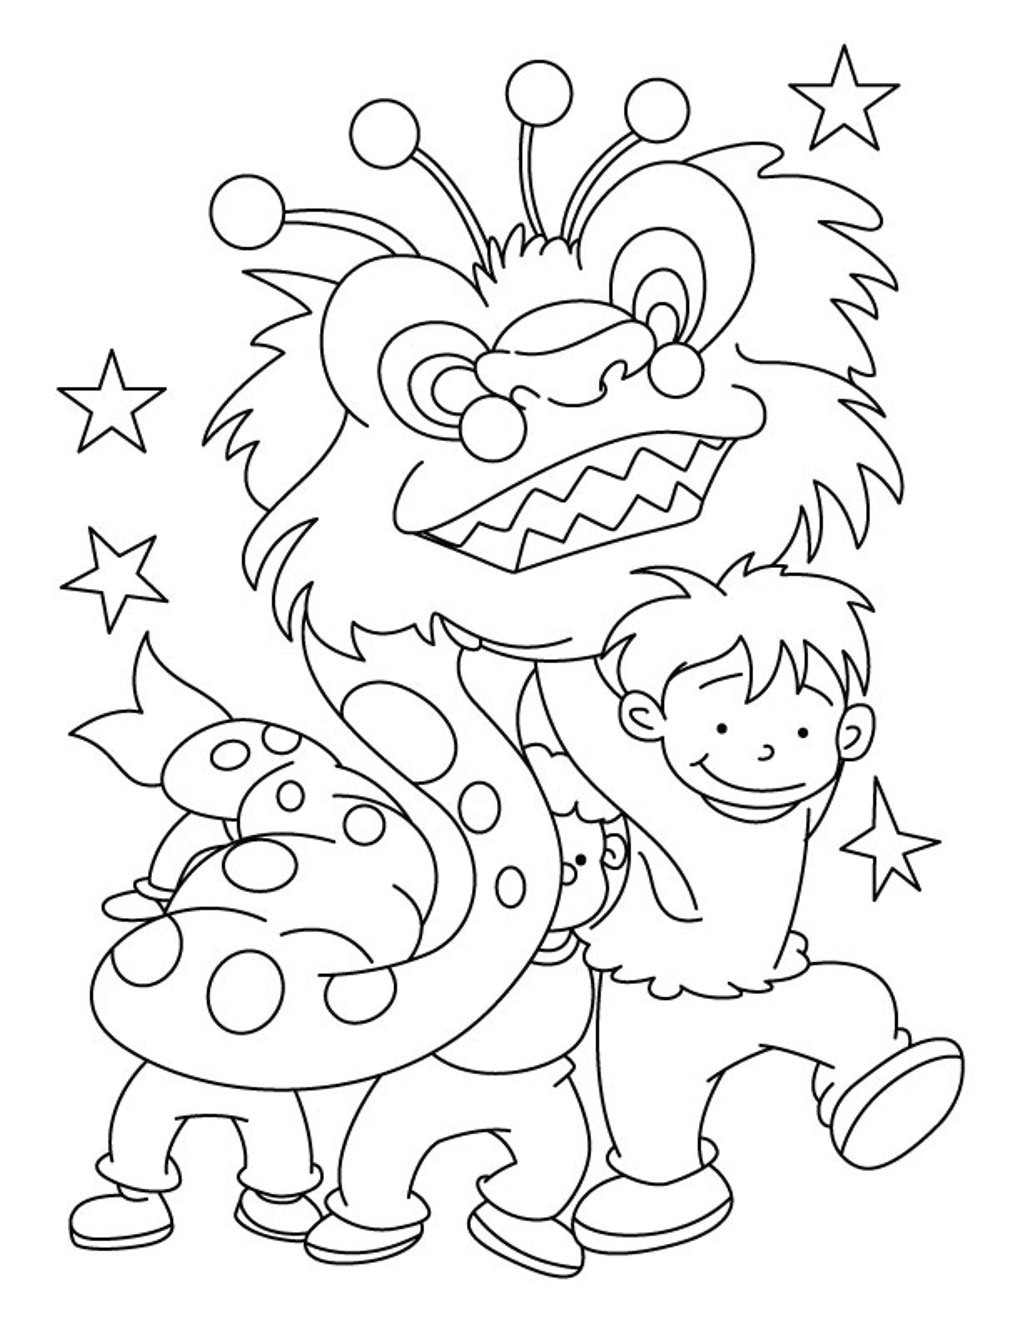 Chinese New Year 2017 Coloring Pages
 Free Printable Coloring Pages For Chinese New Year The